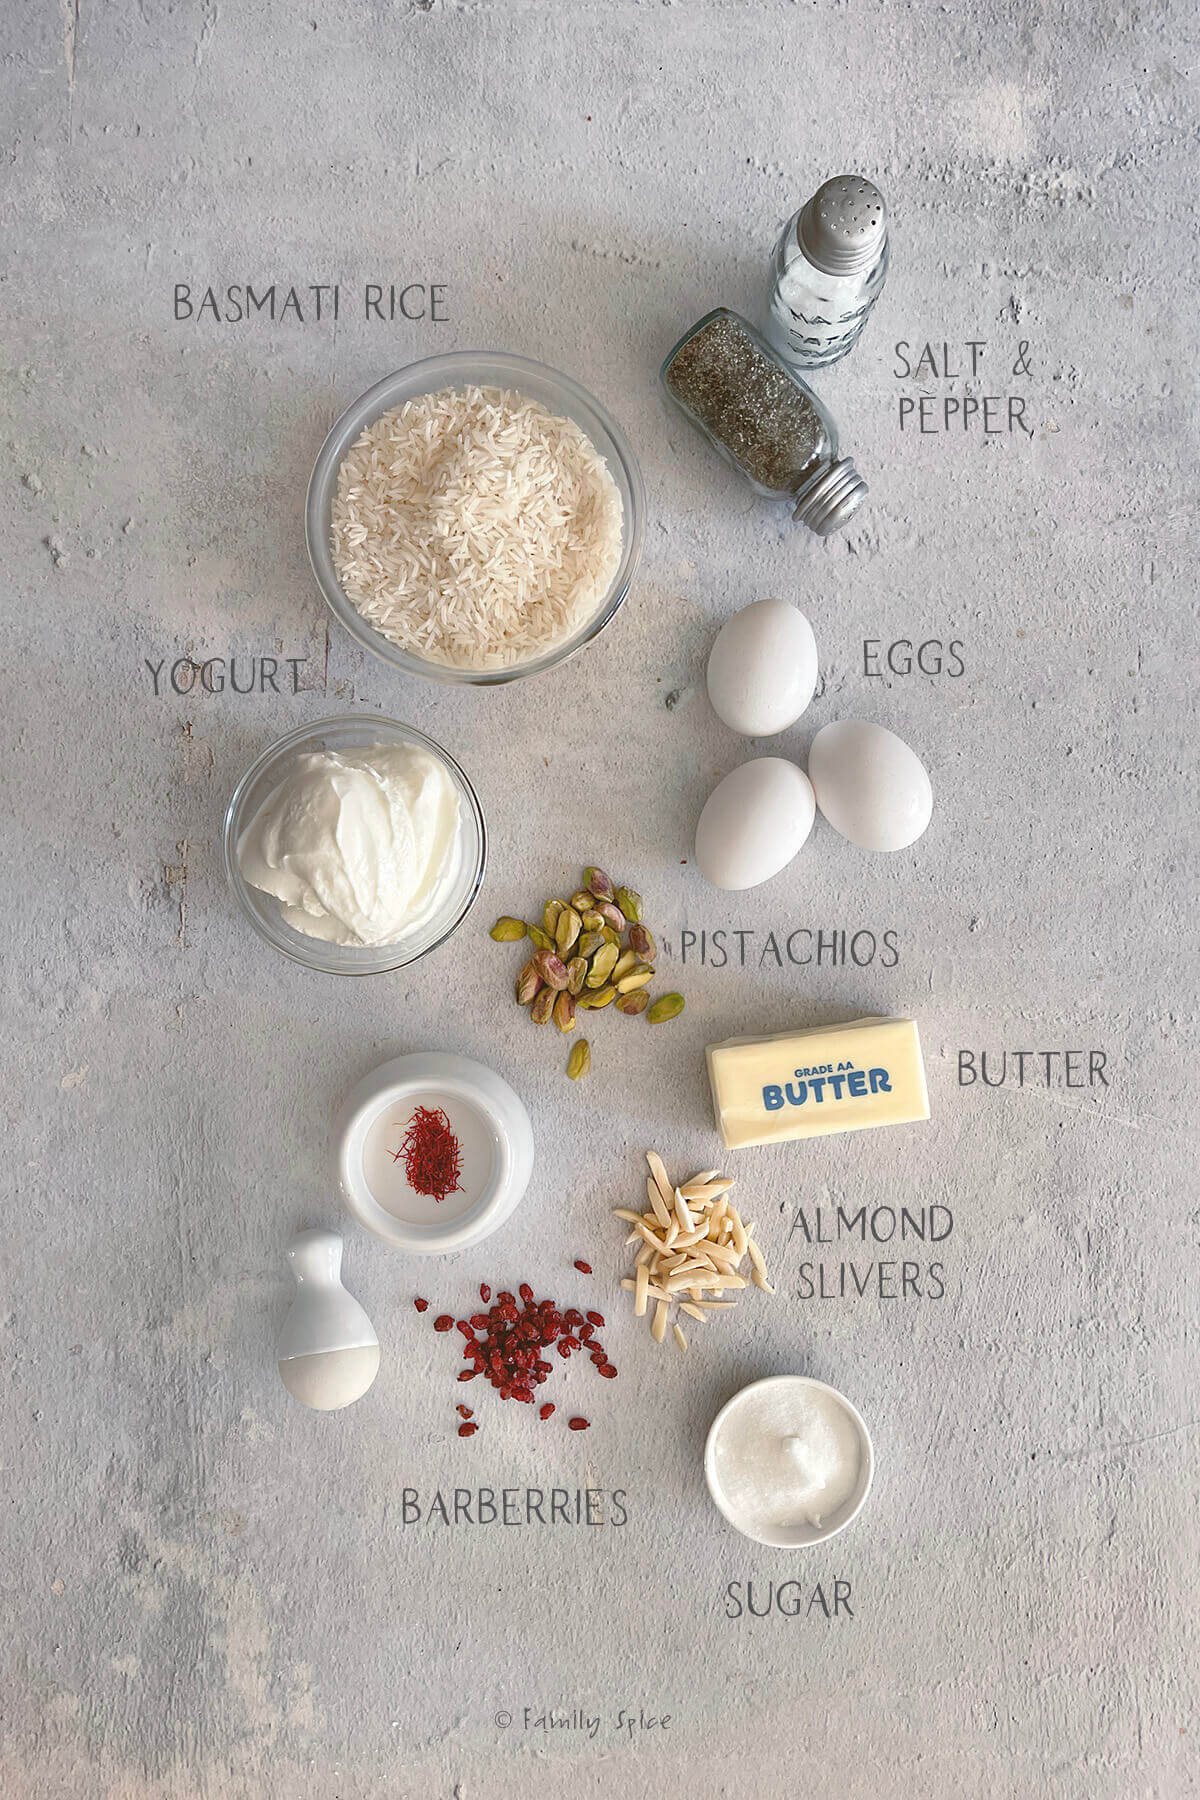 Ingredients labeled and needed to make Persian tahchin